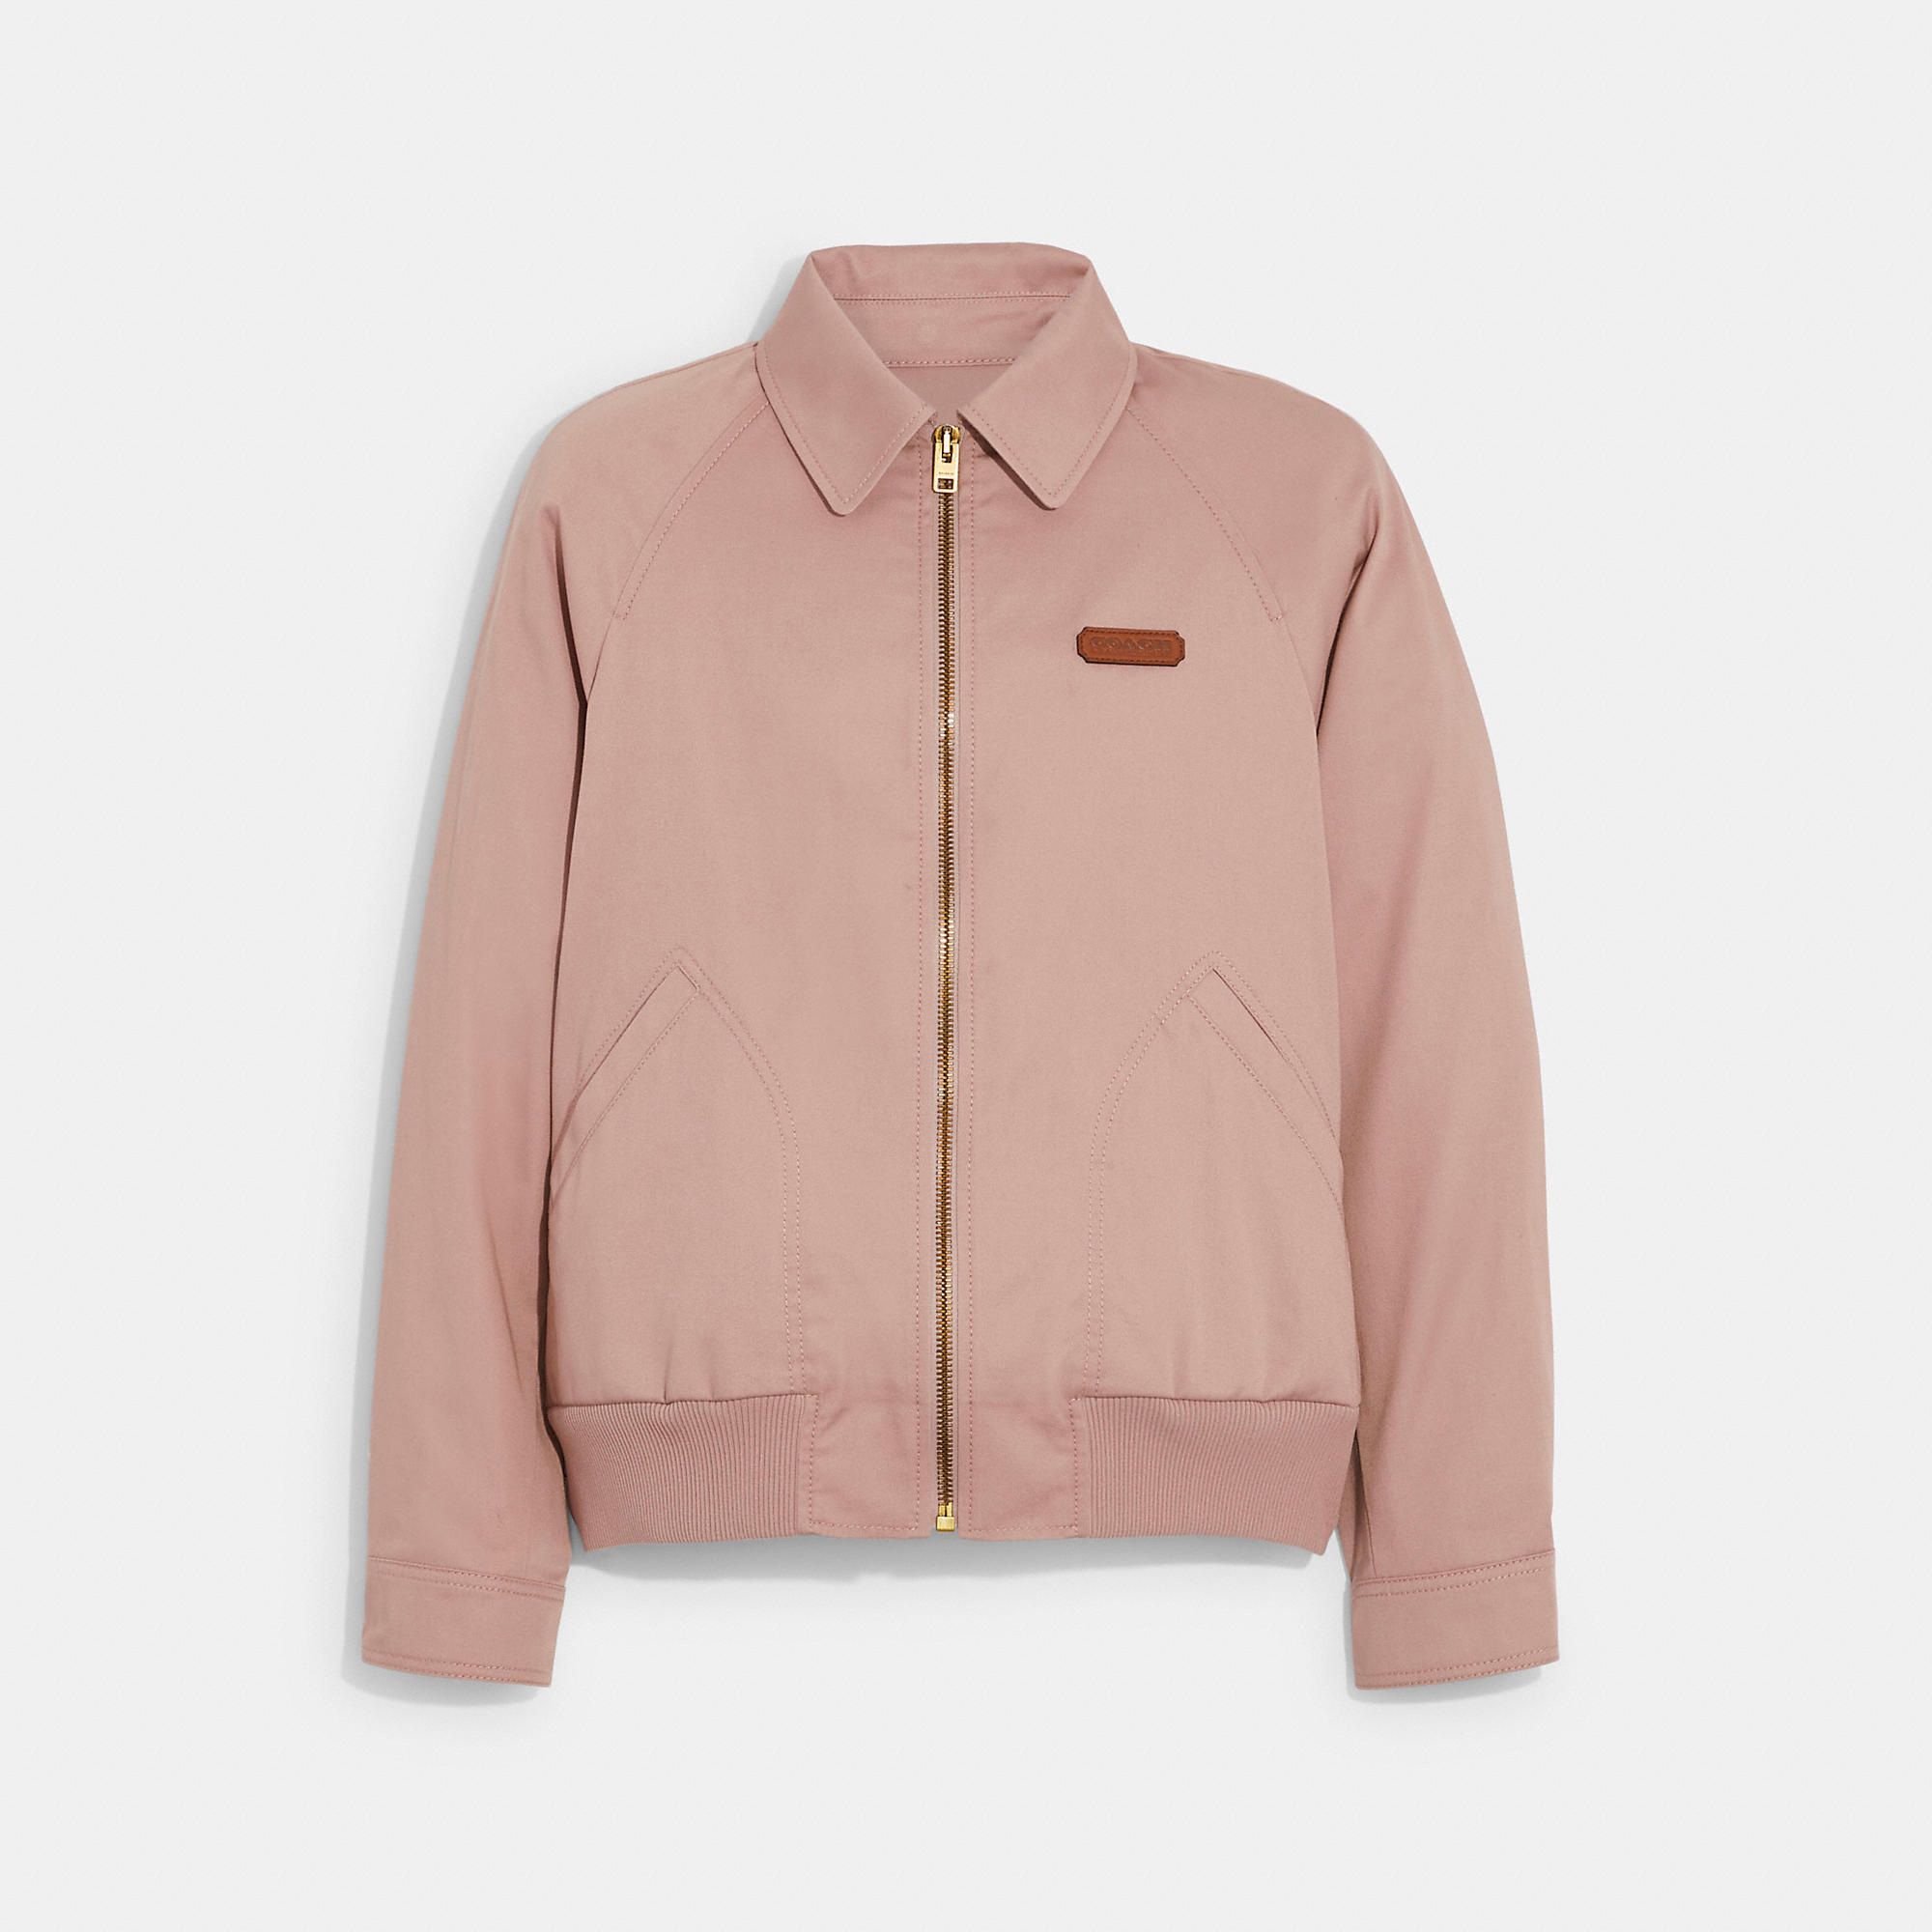 Coach Outlet Harrington Jacket In Pink